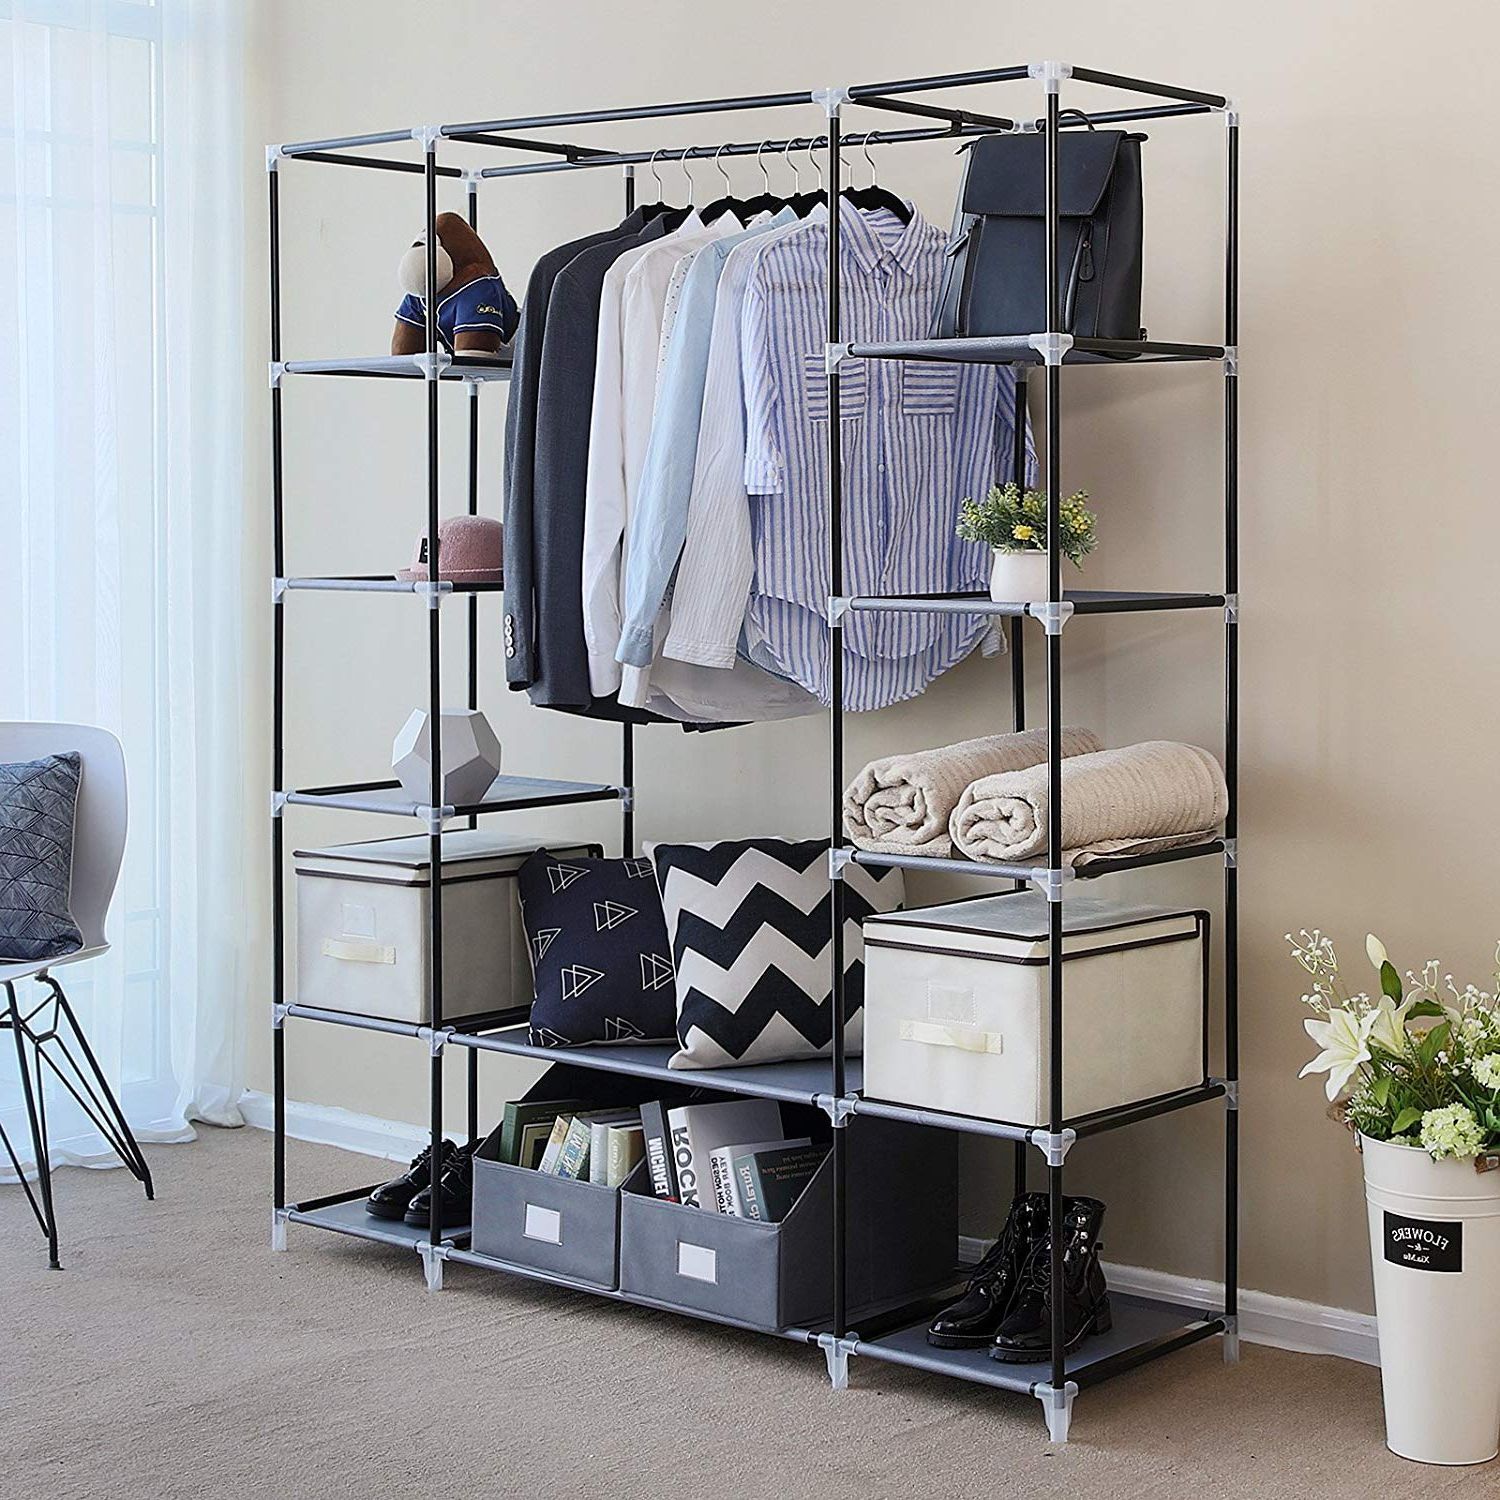 20 Portable Closet Choices For Easy Set Up And Cleaning | Storables Inside Extra Wide Portable Wardrobes (Gallery 16 of 20)